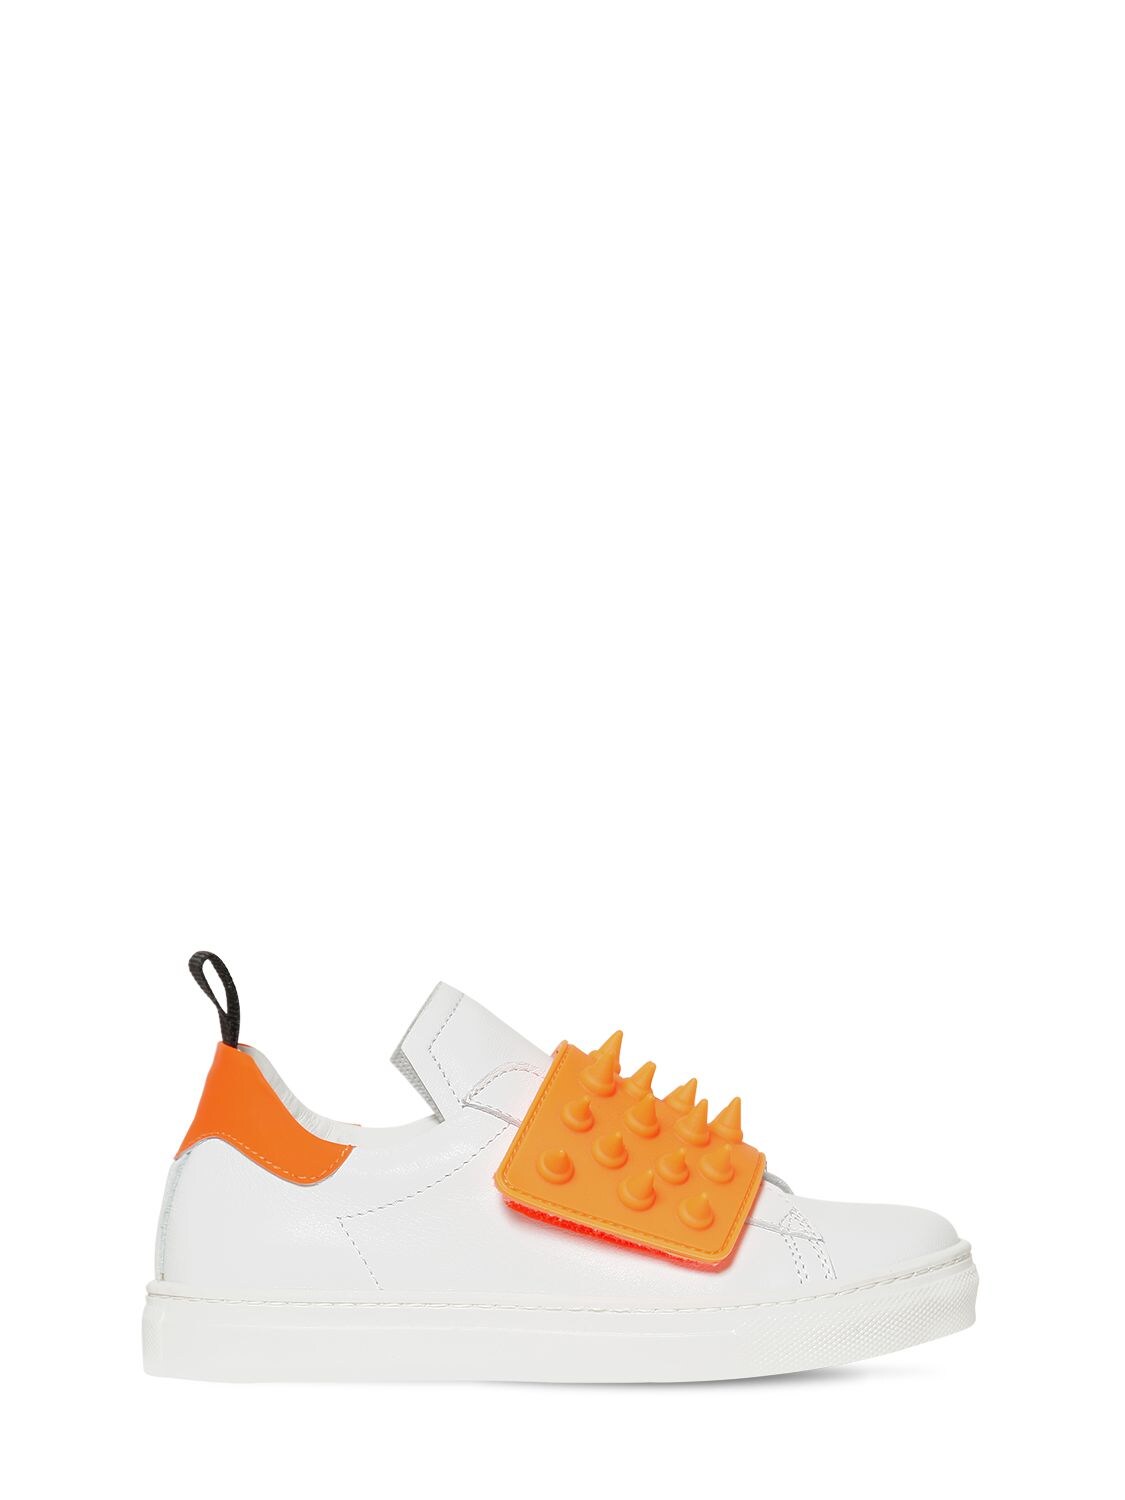 Am 66 Kids' Spiked Two Tone Leather Sneakers In White,orange